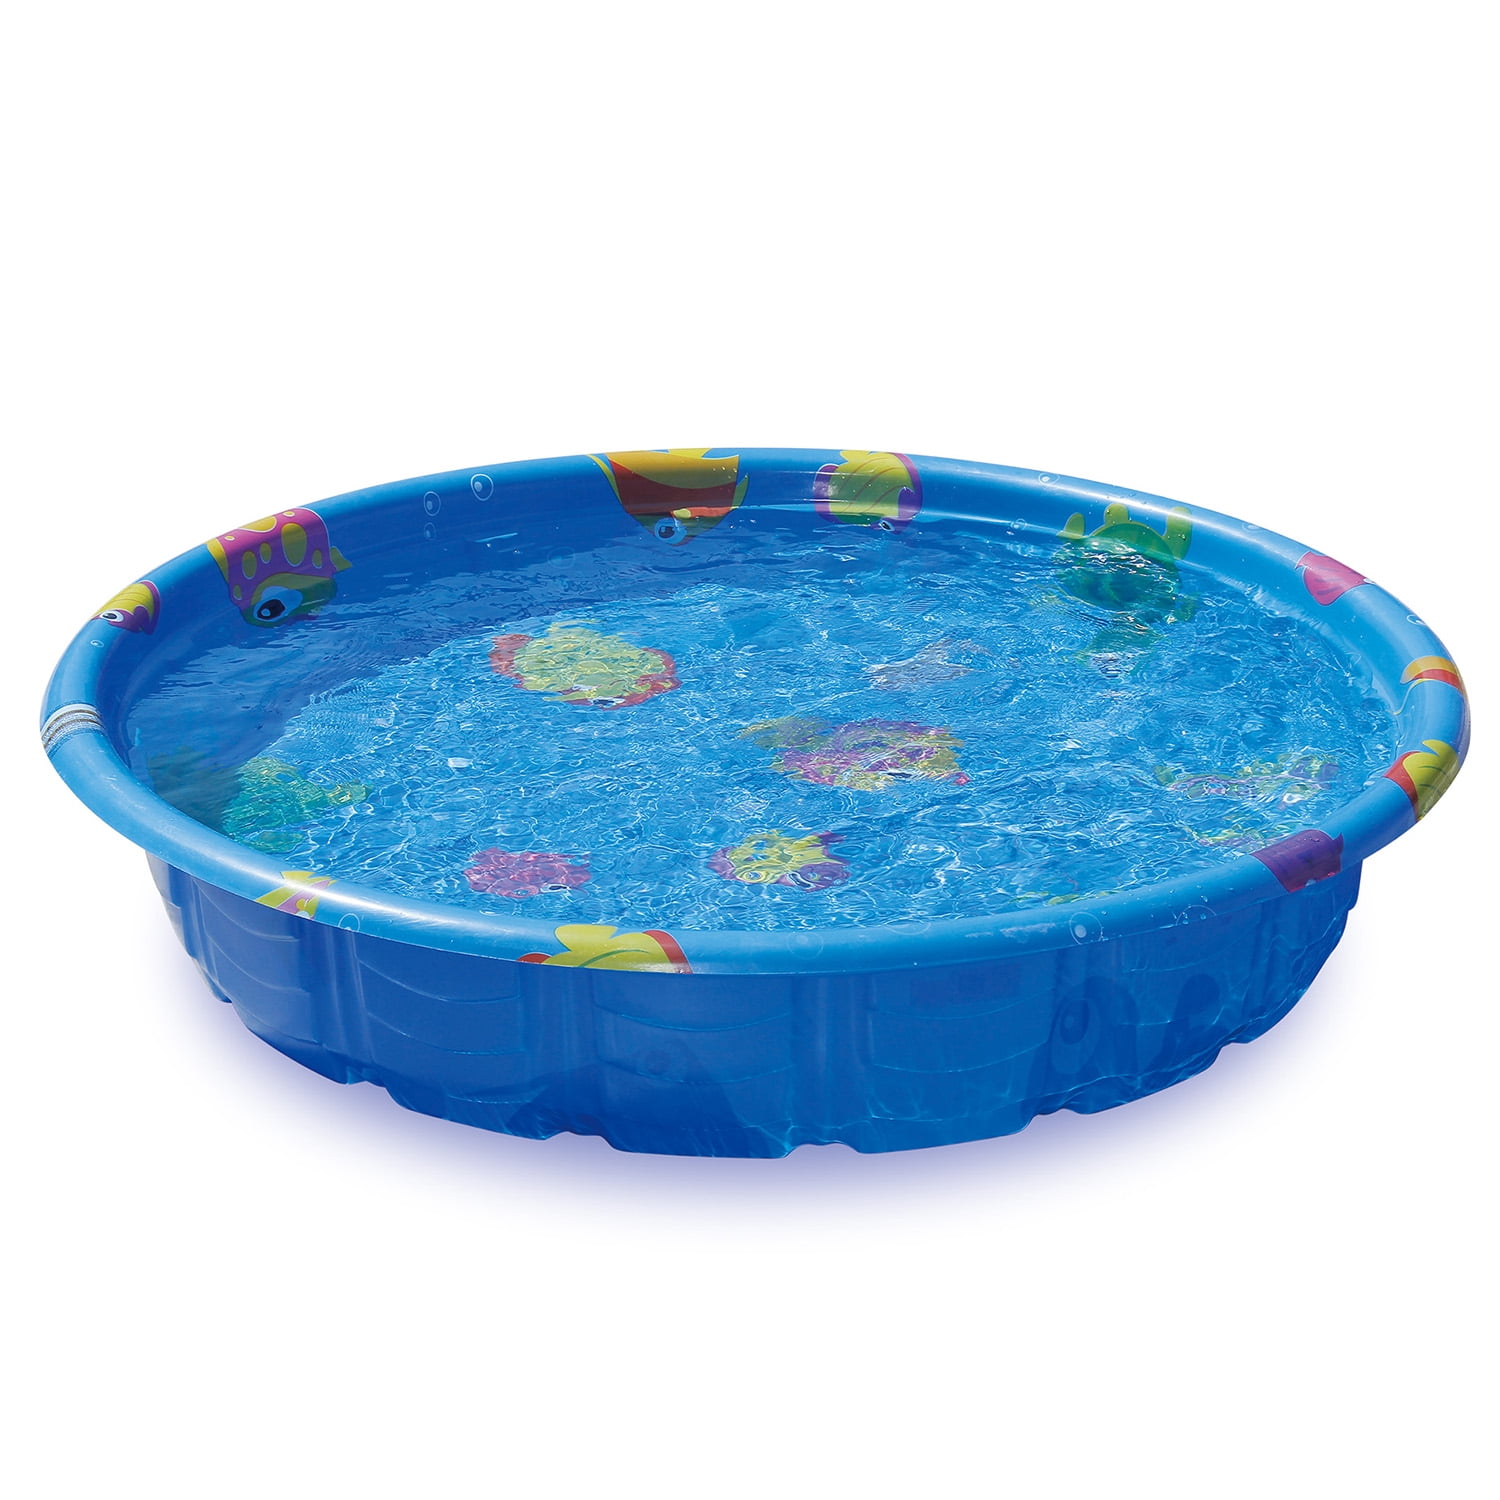 Summer Escapes 59" Assorted Colors Molded Pool – Walmart Inventory